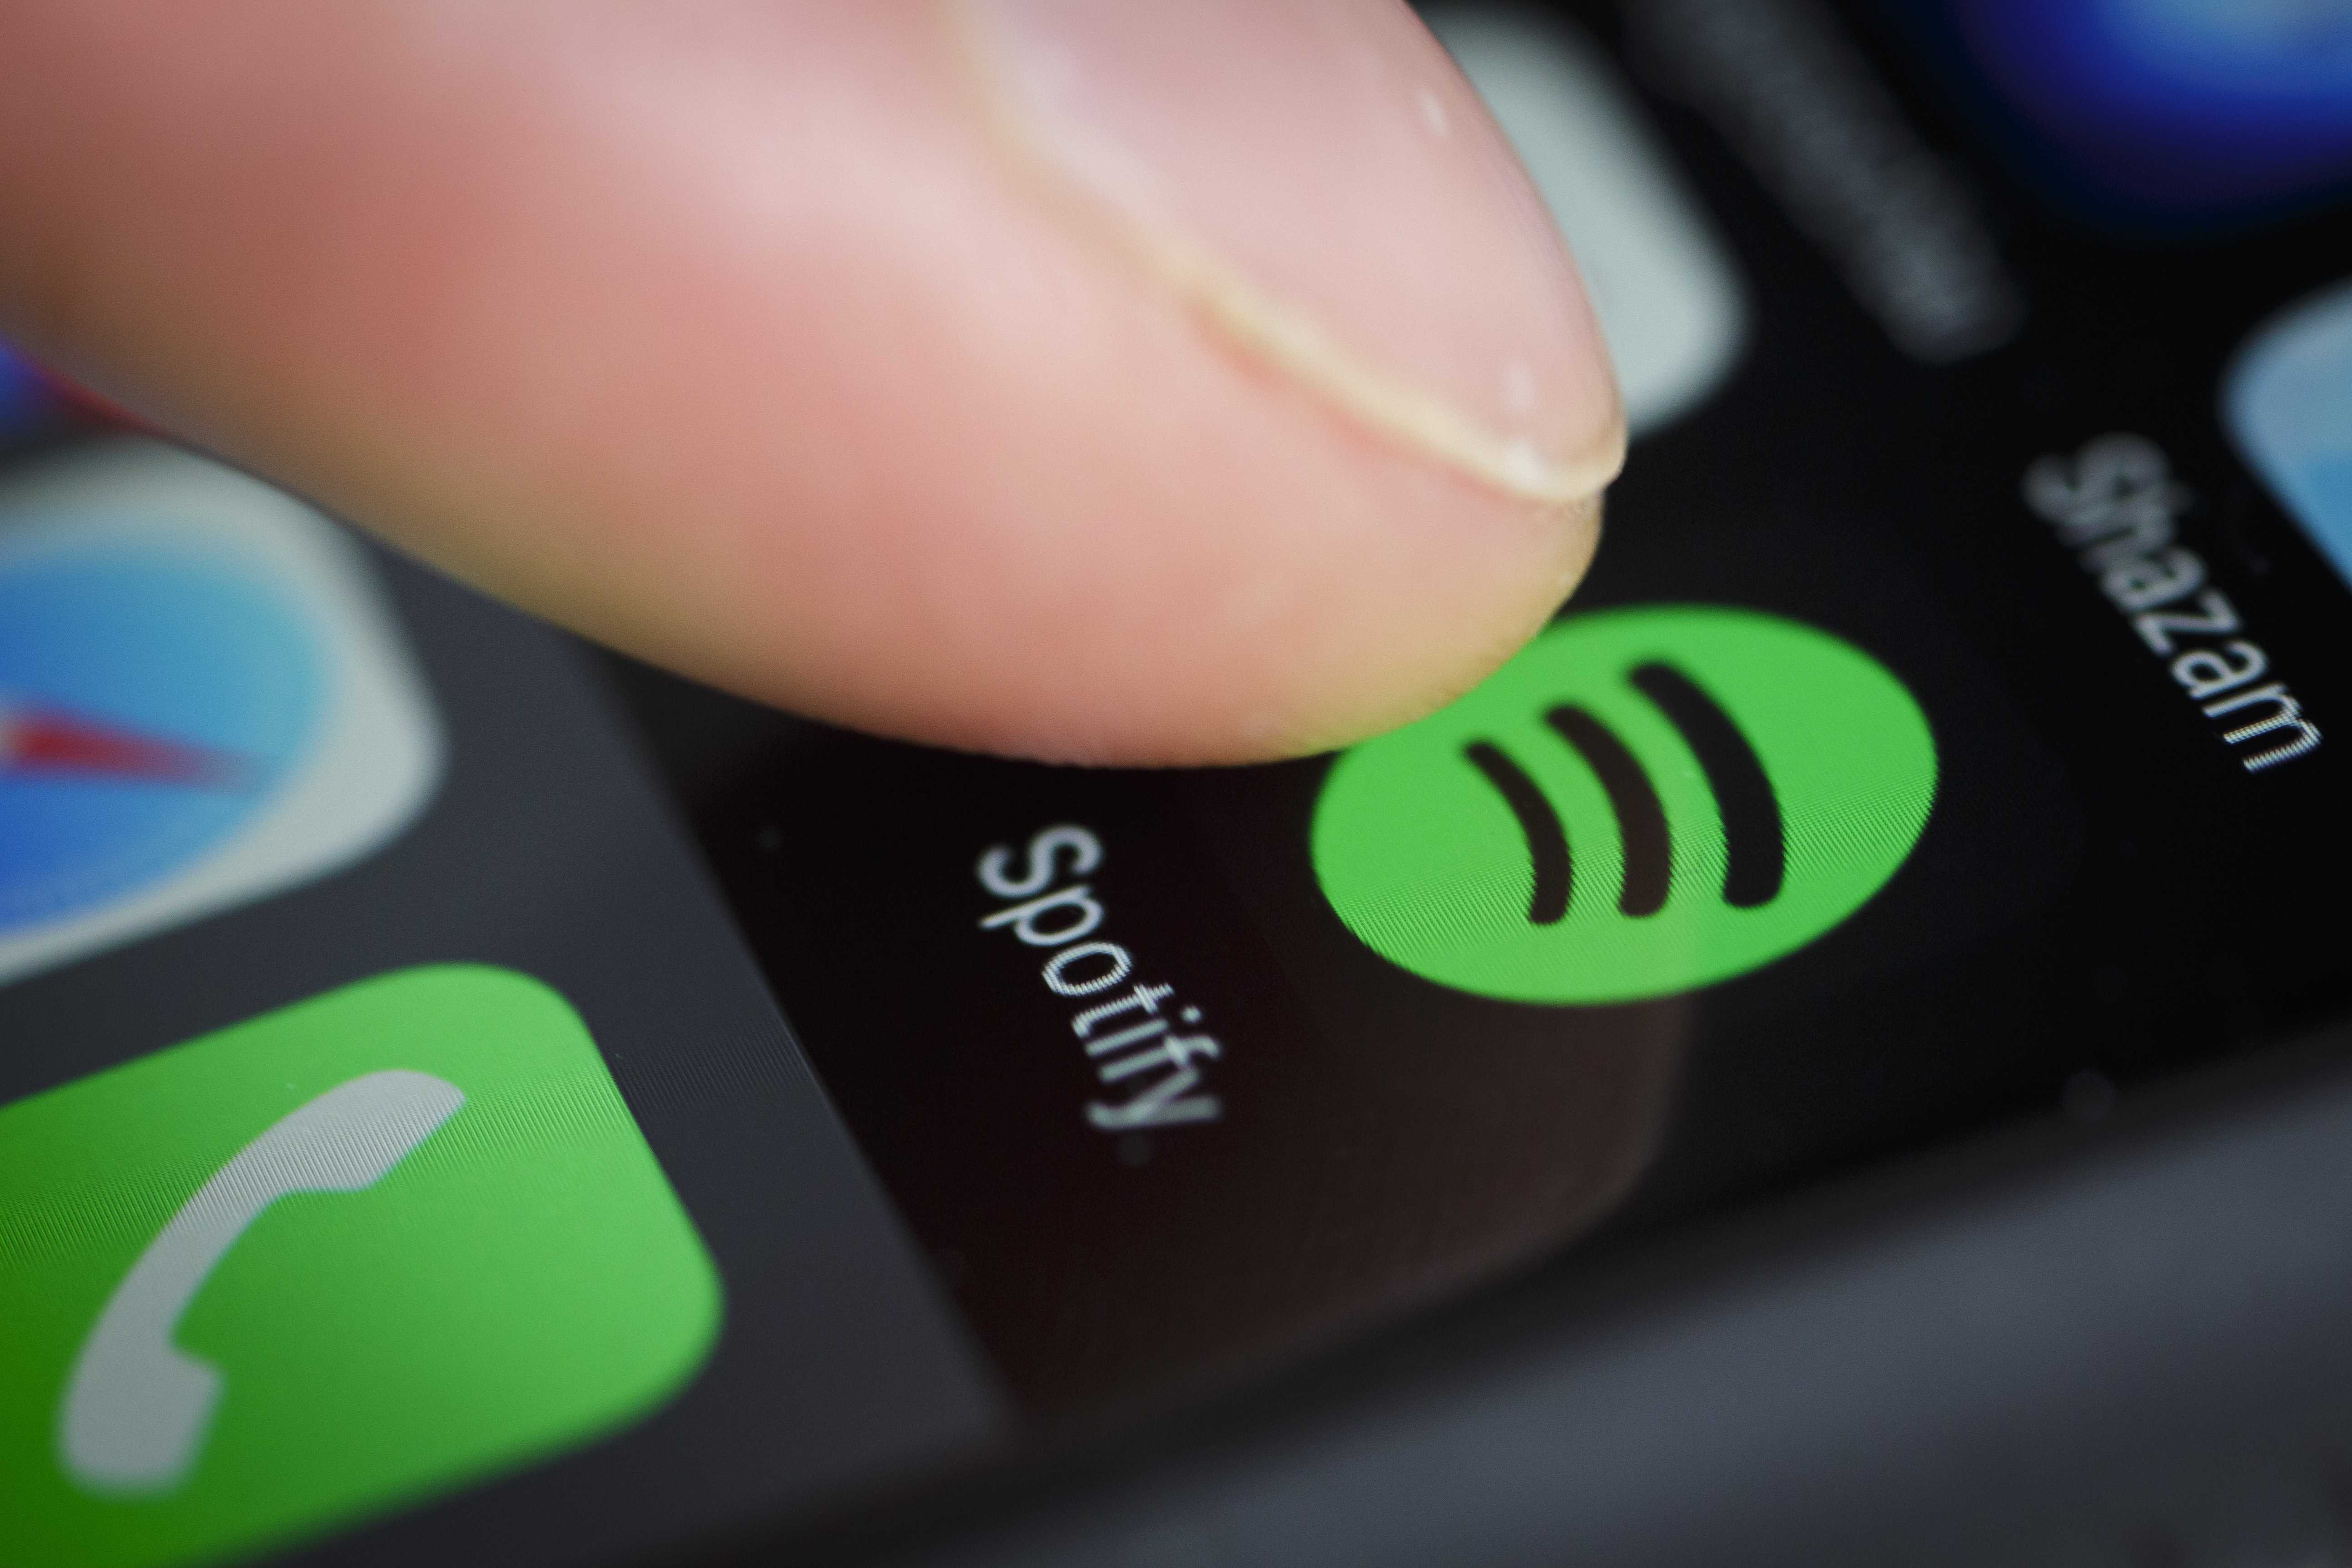 Spotify is removing bands that 'encourage hatred or violence'